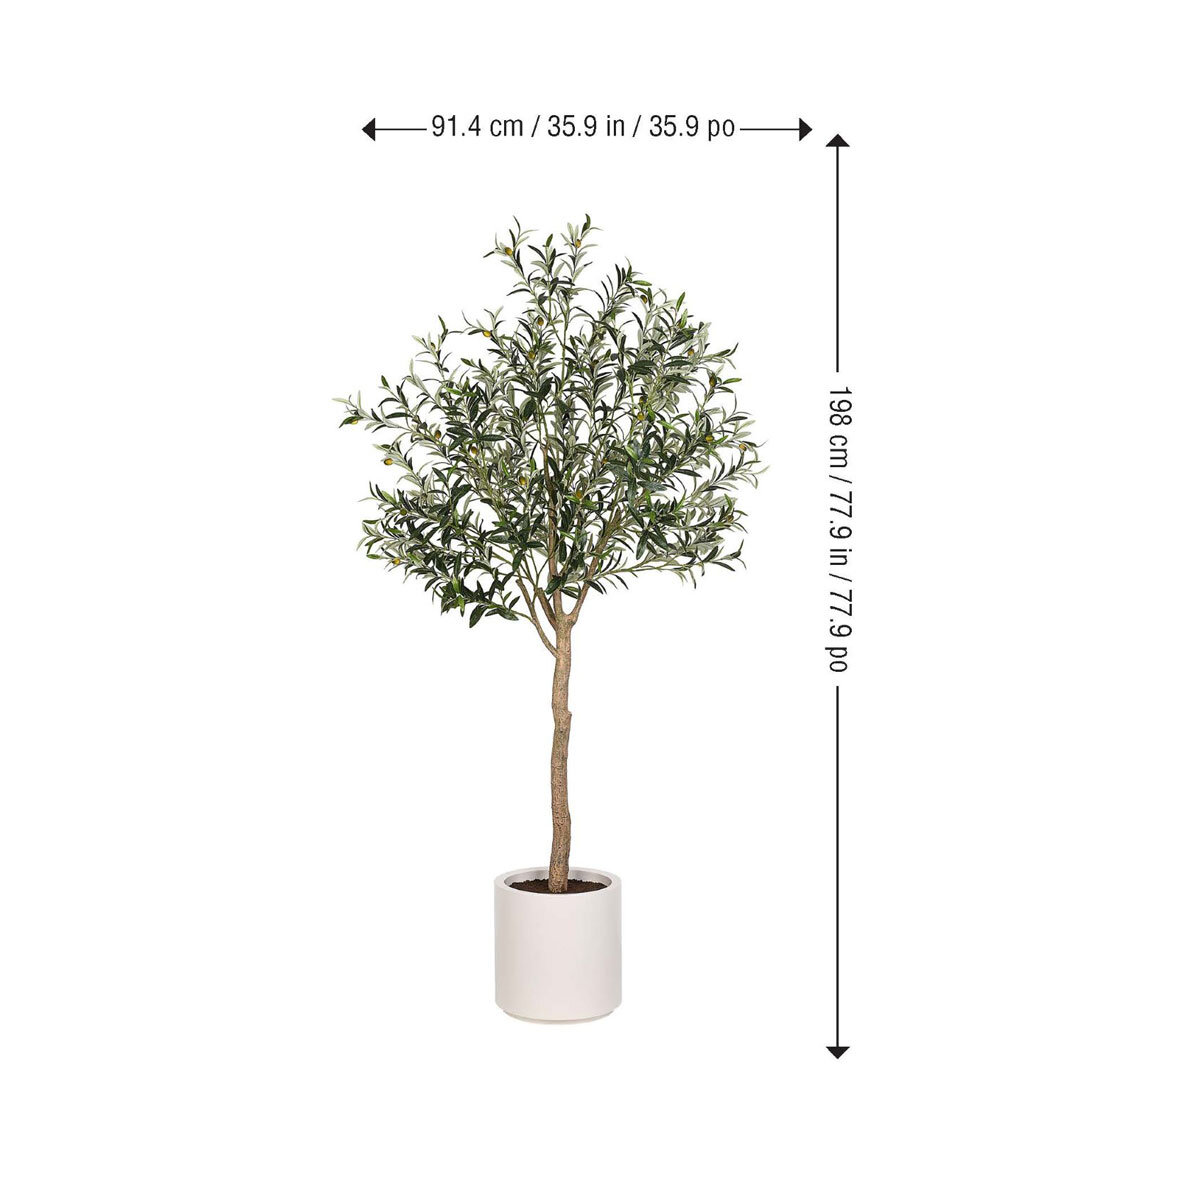 Dimensions of Beaumont Artificial Olive Tree in Planter